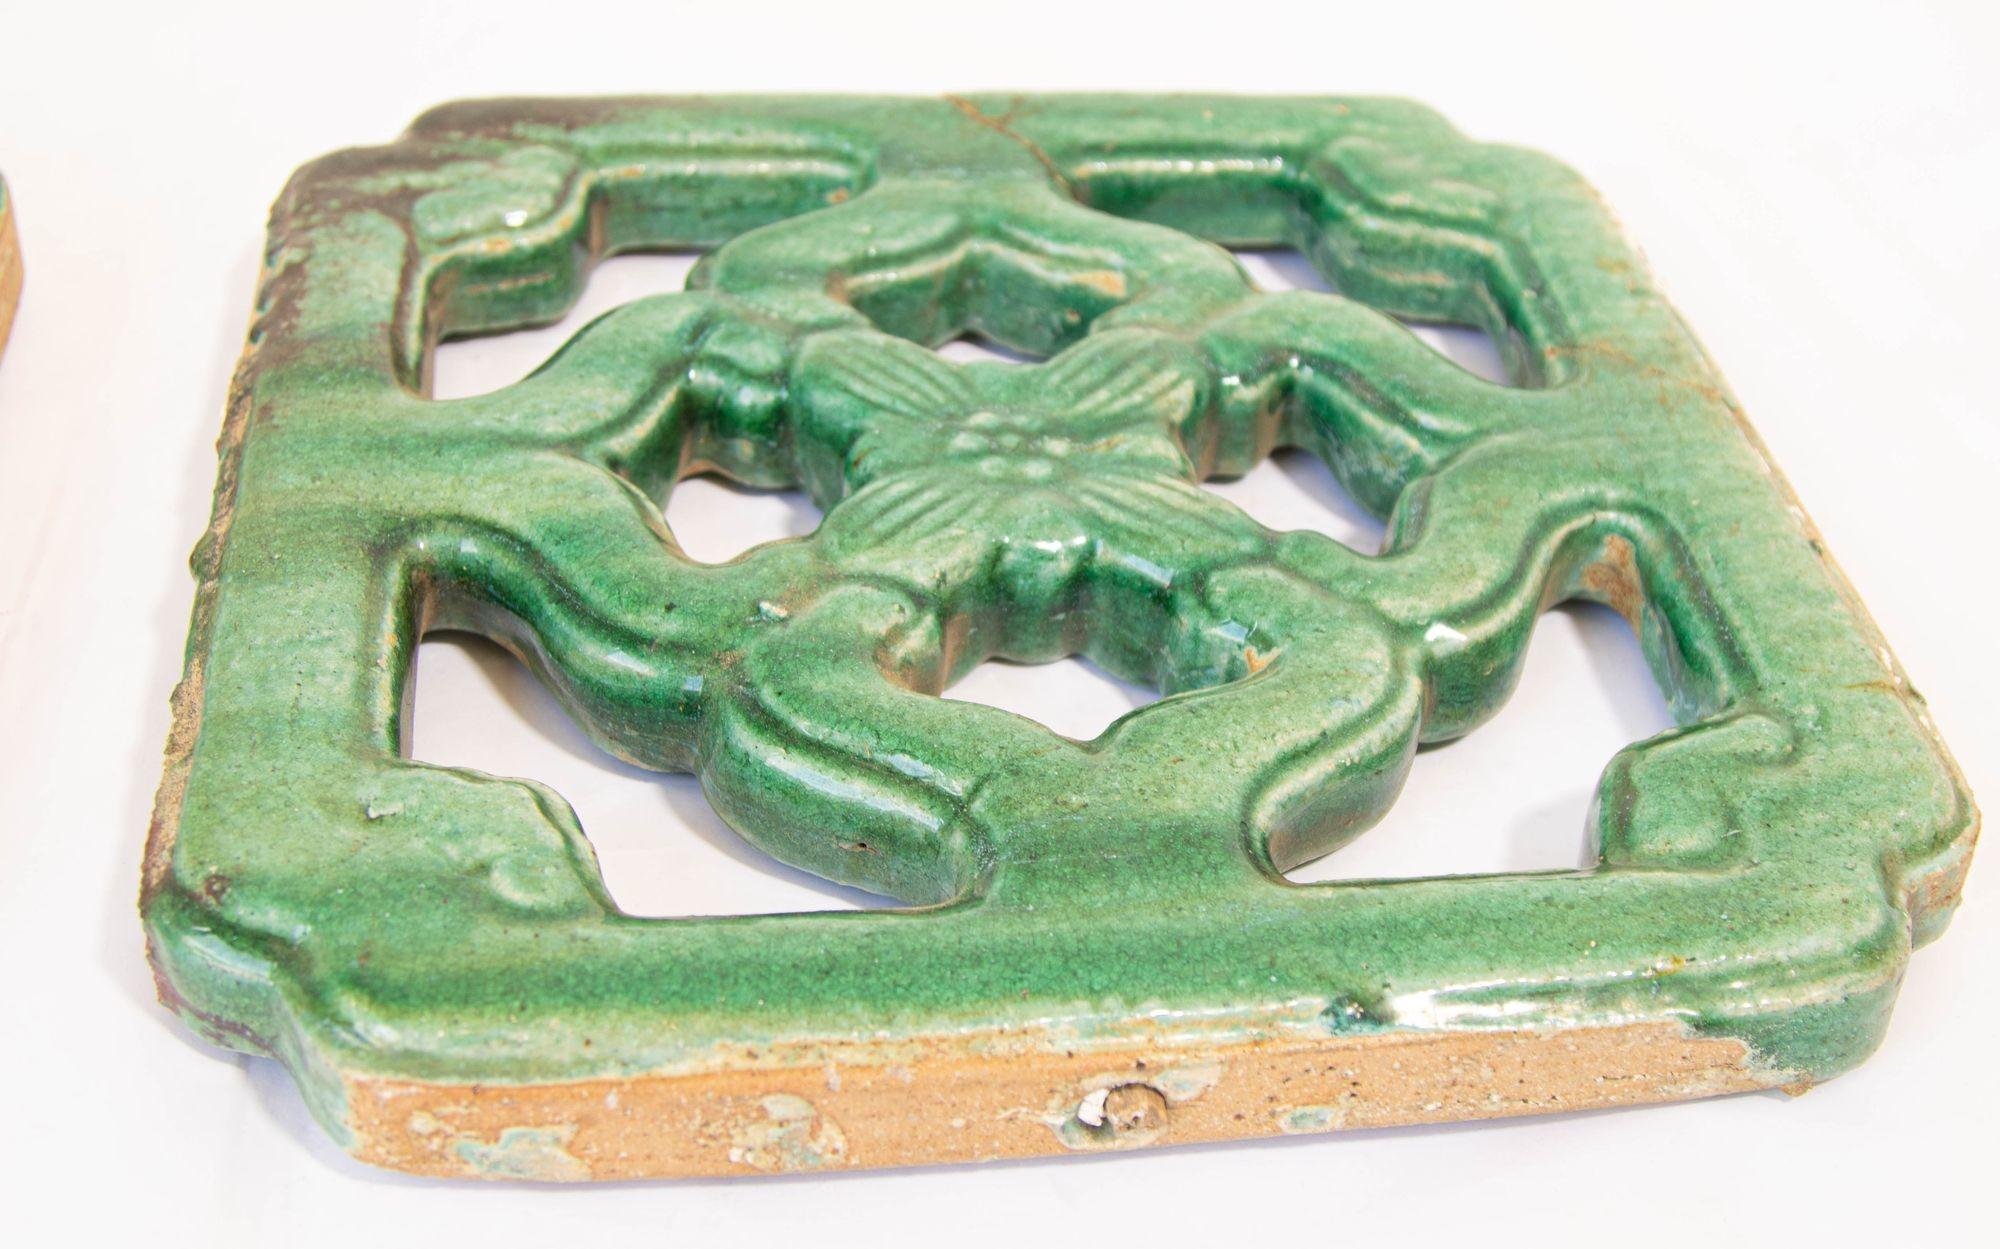 Antique Chinese Emerald Green Glazed Architectural Tile, circa 1900 Set of 2 For Sale 4